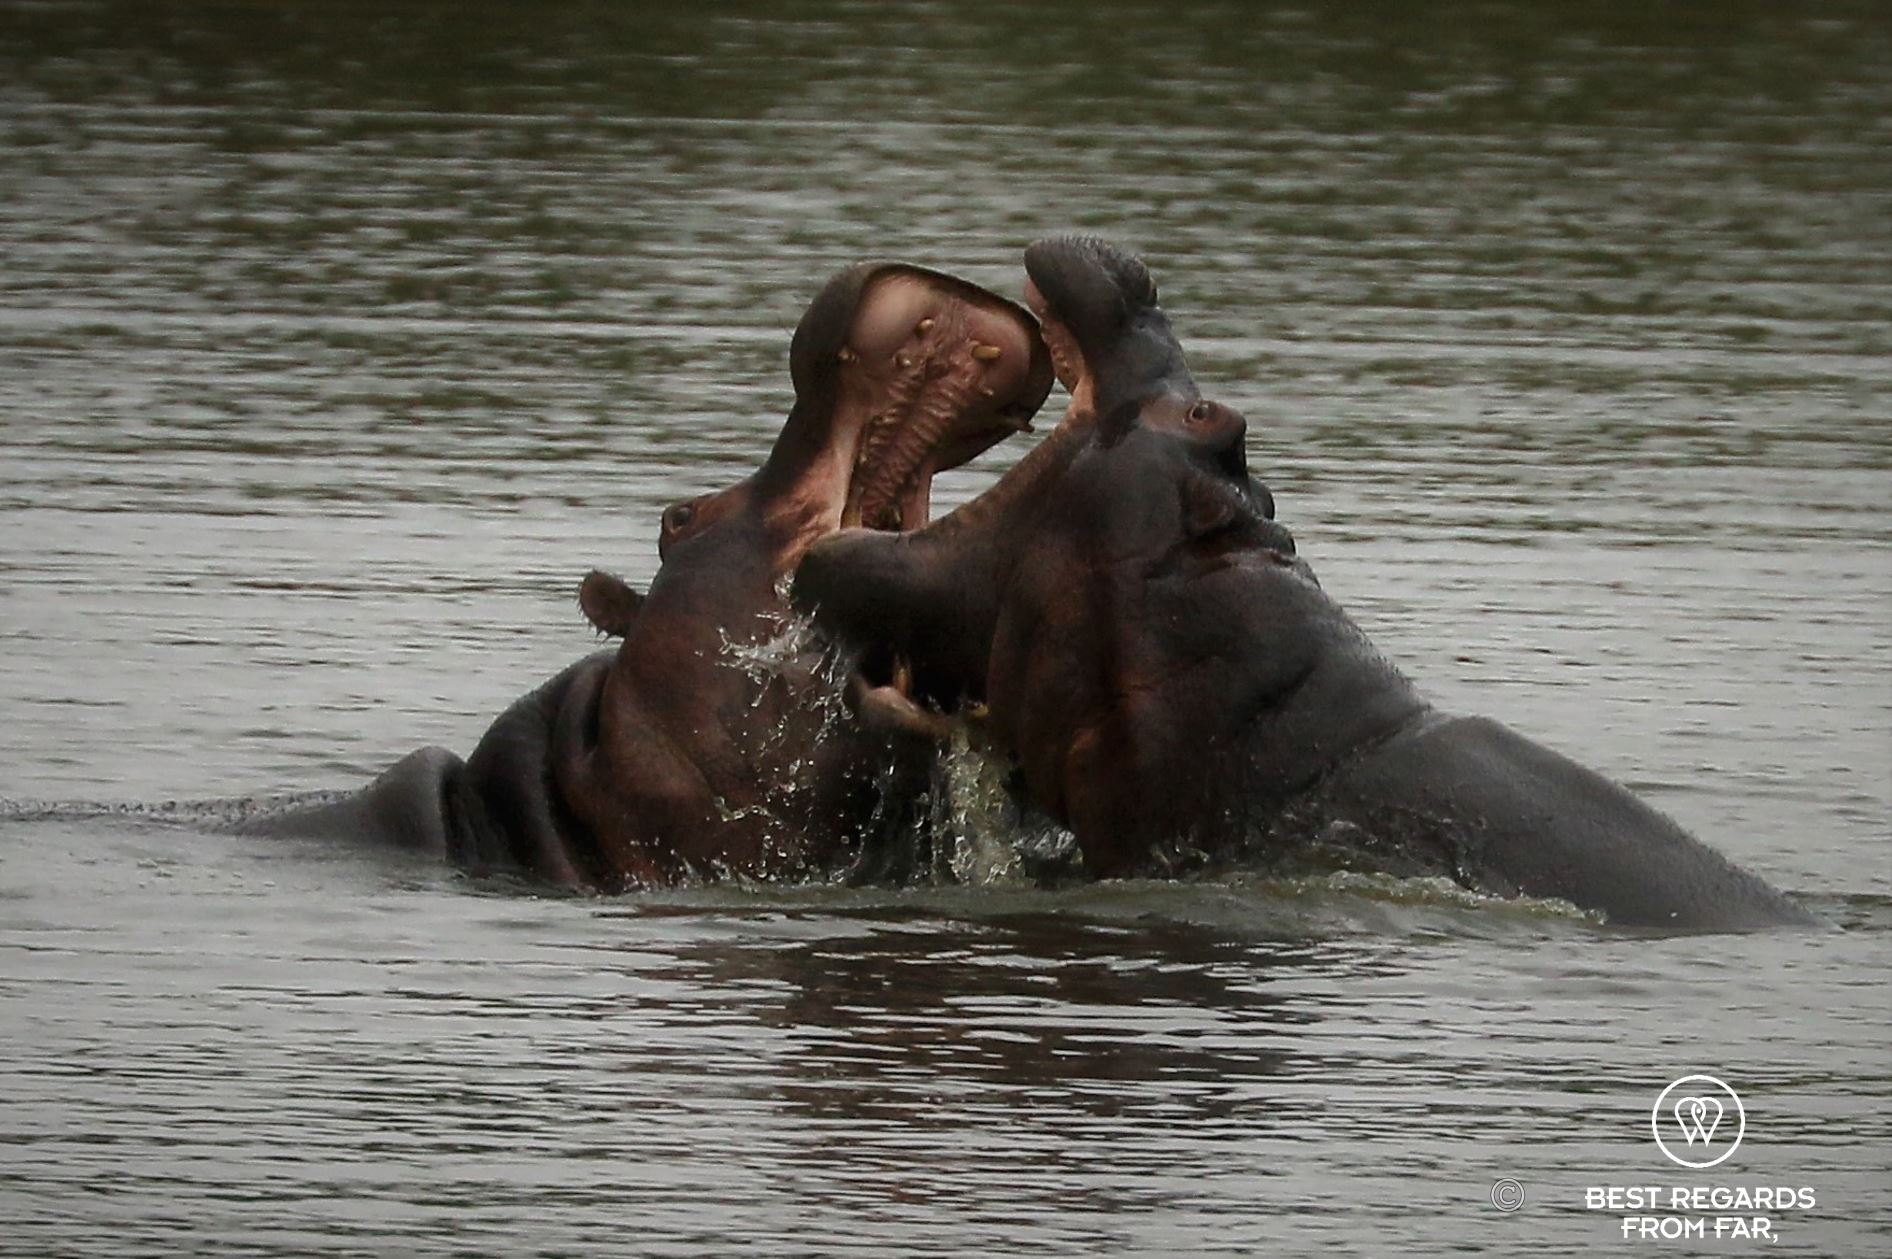 Two hippos with their mouths open fighting in the water, Kruger NP, South Africa.